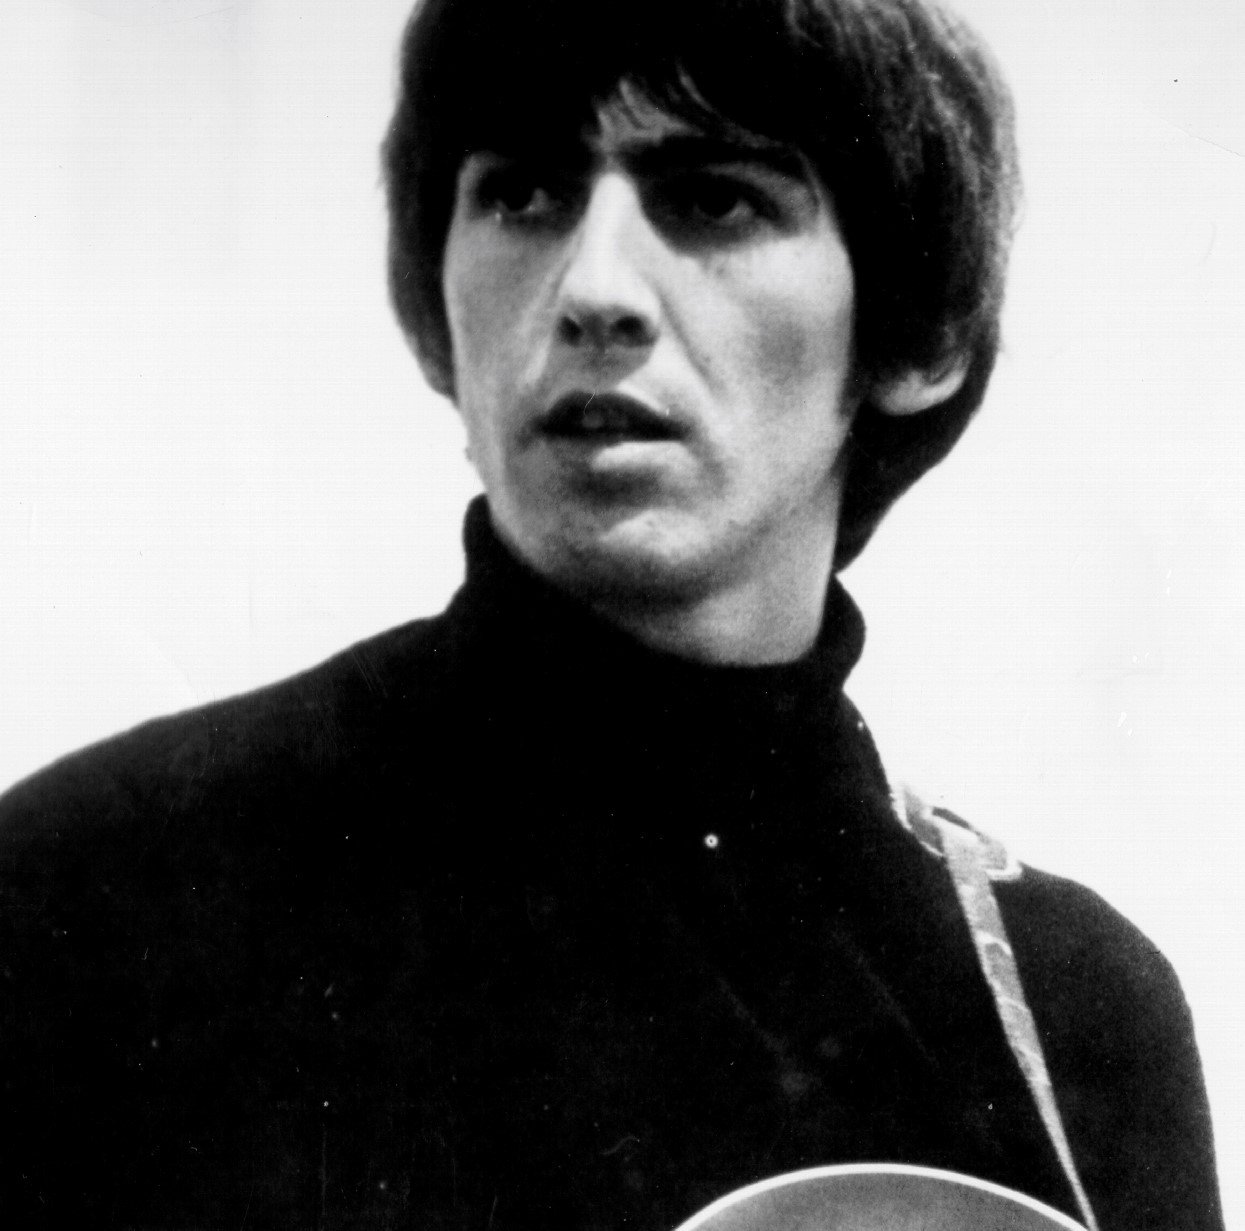 The Beatles' George Harrison in black-and-white